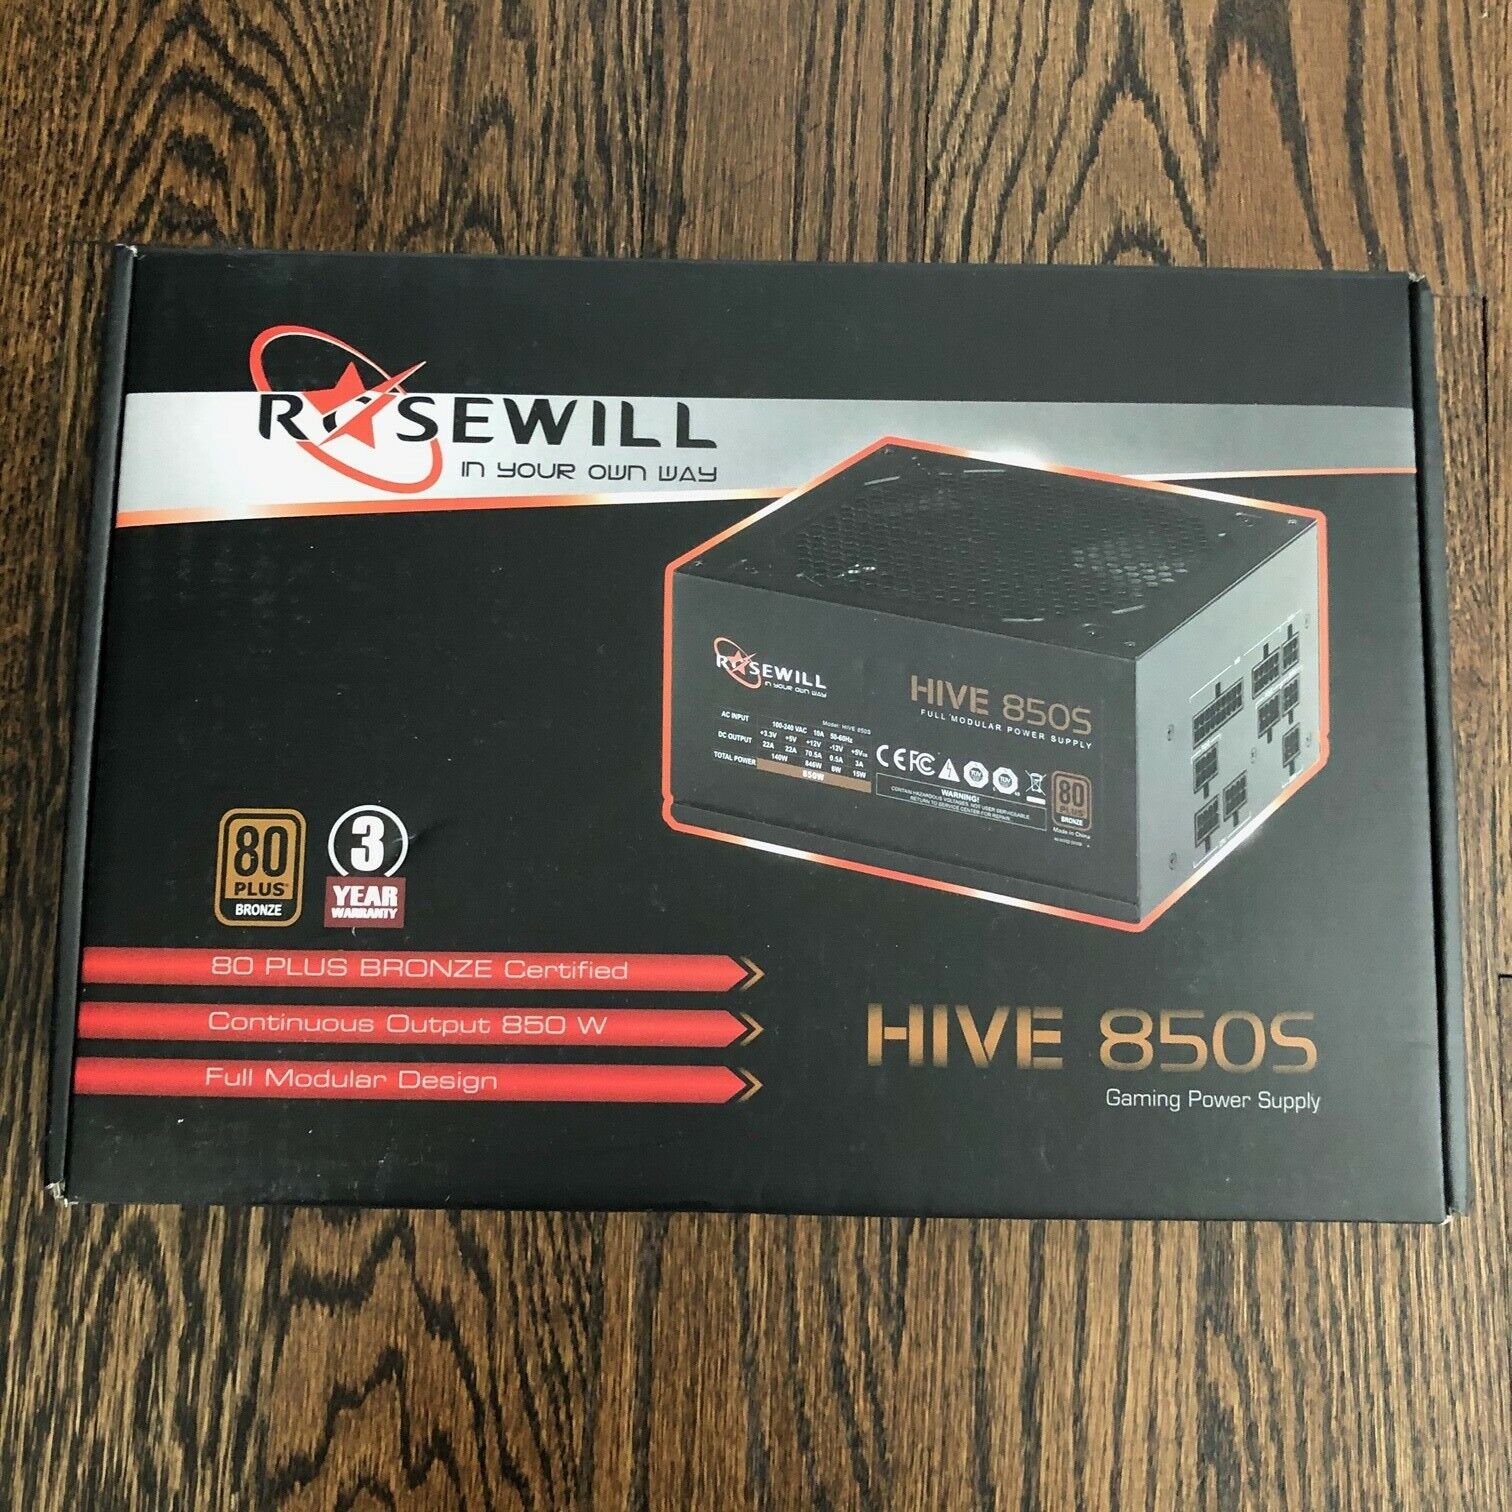 Rosewill Hive 850W Gaming Power Supply 80 PLUS Bronze Certified - Open Box